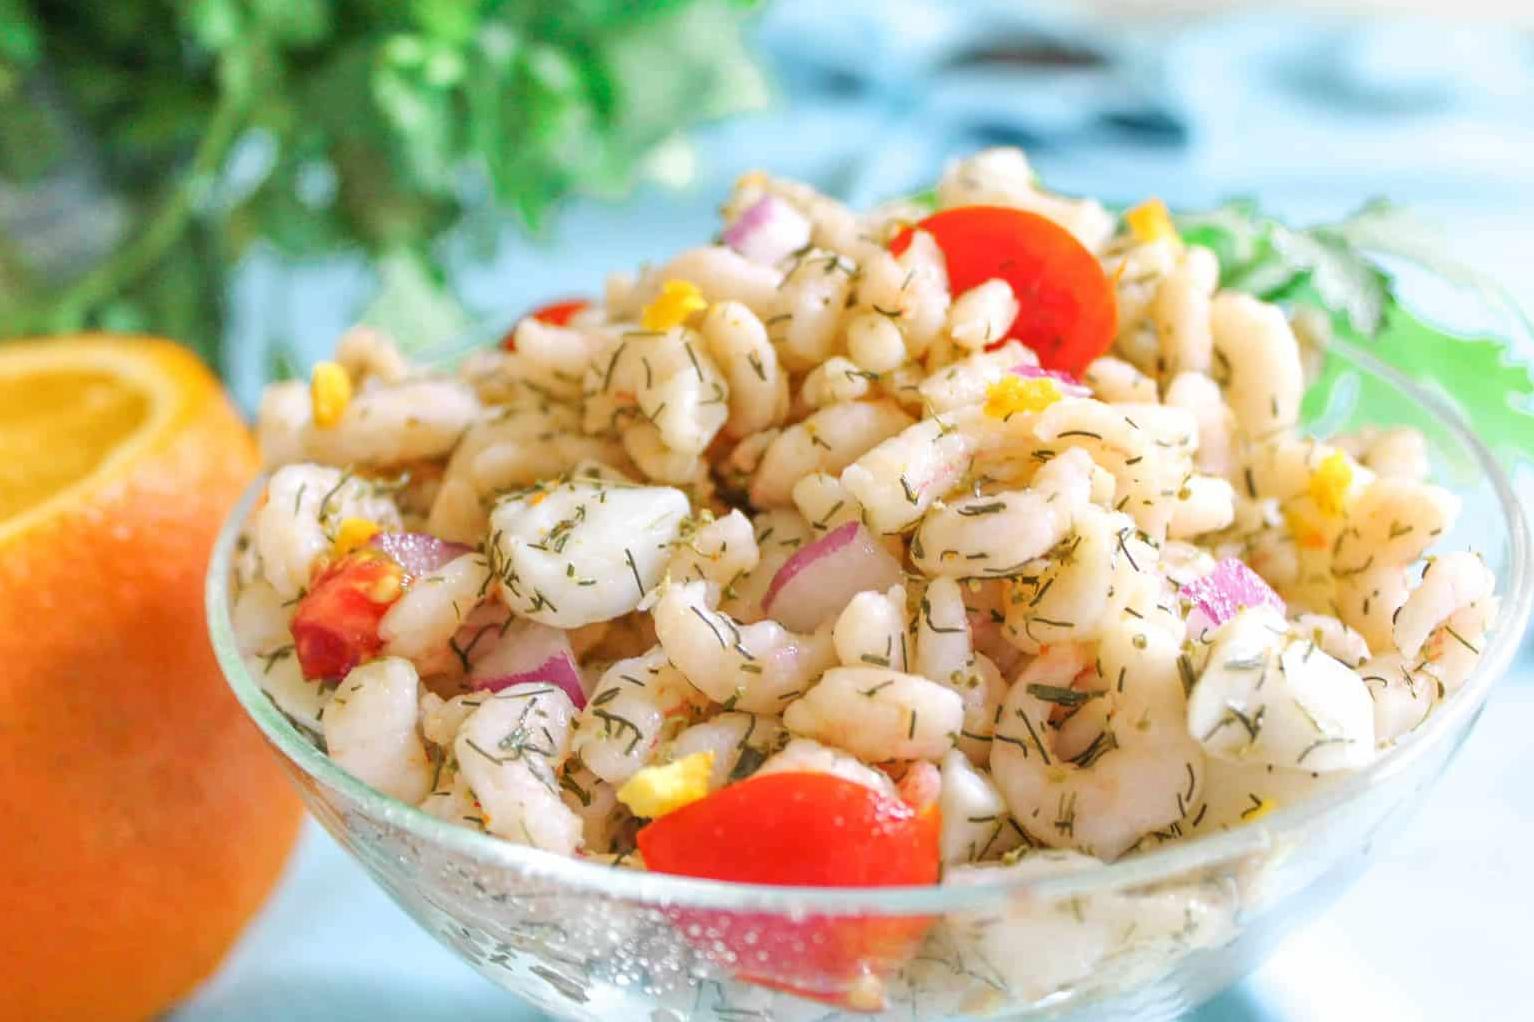  A light yet satisfying dish for seafood lovers everywhere!